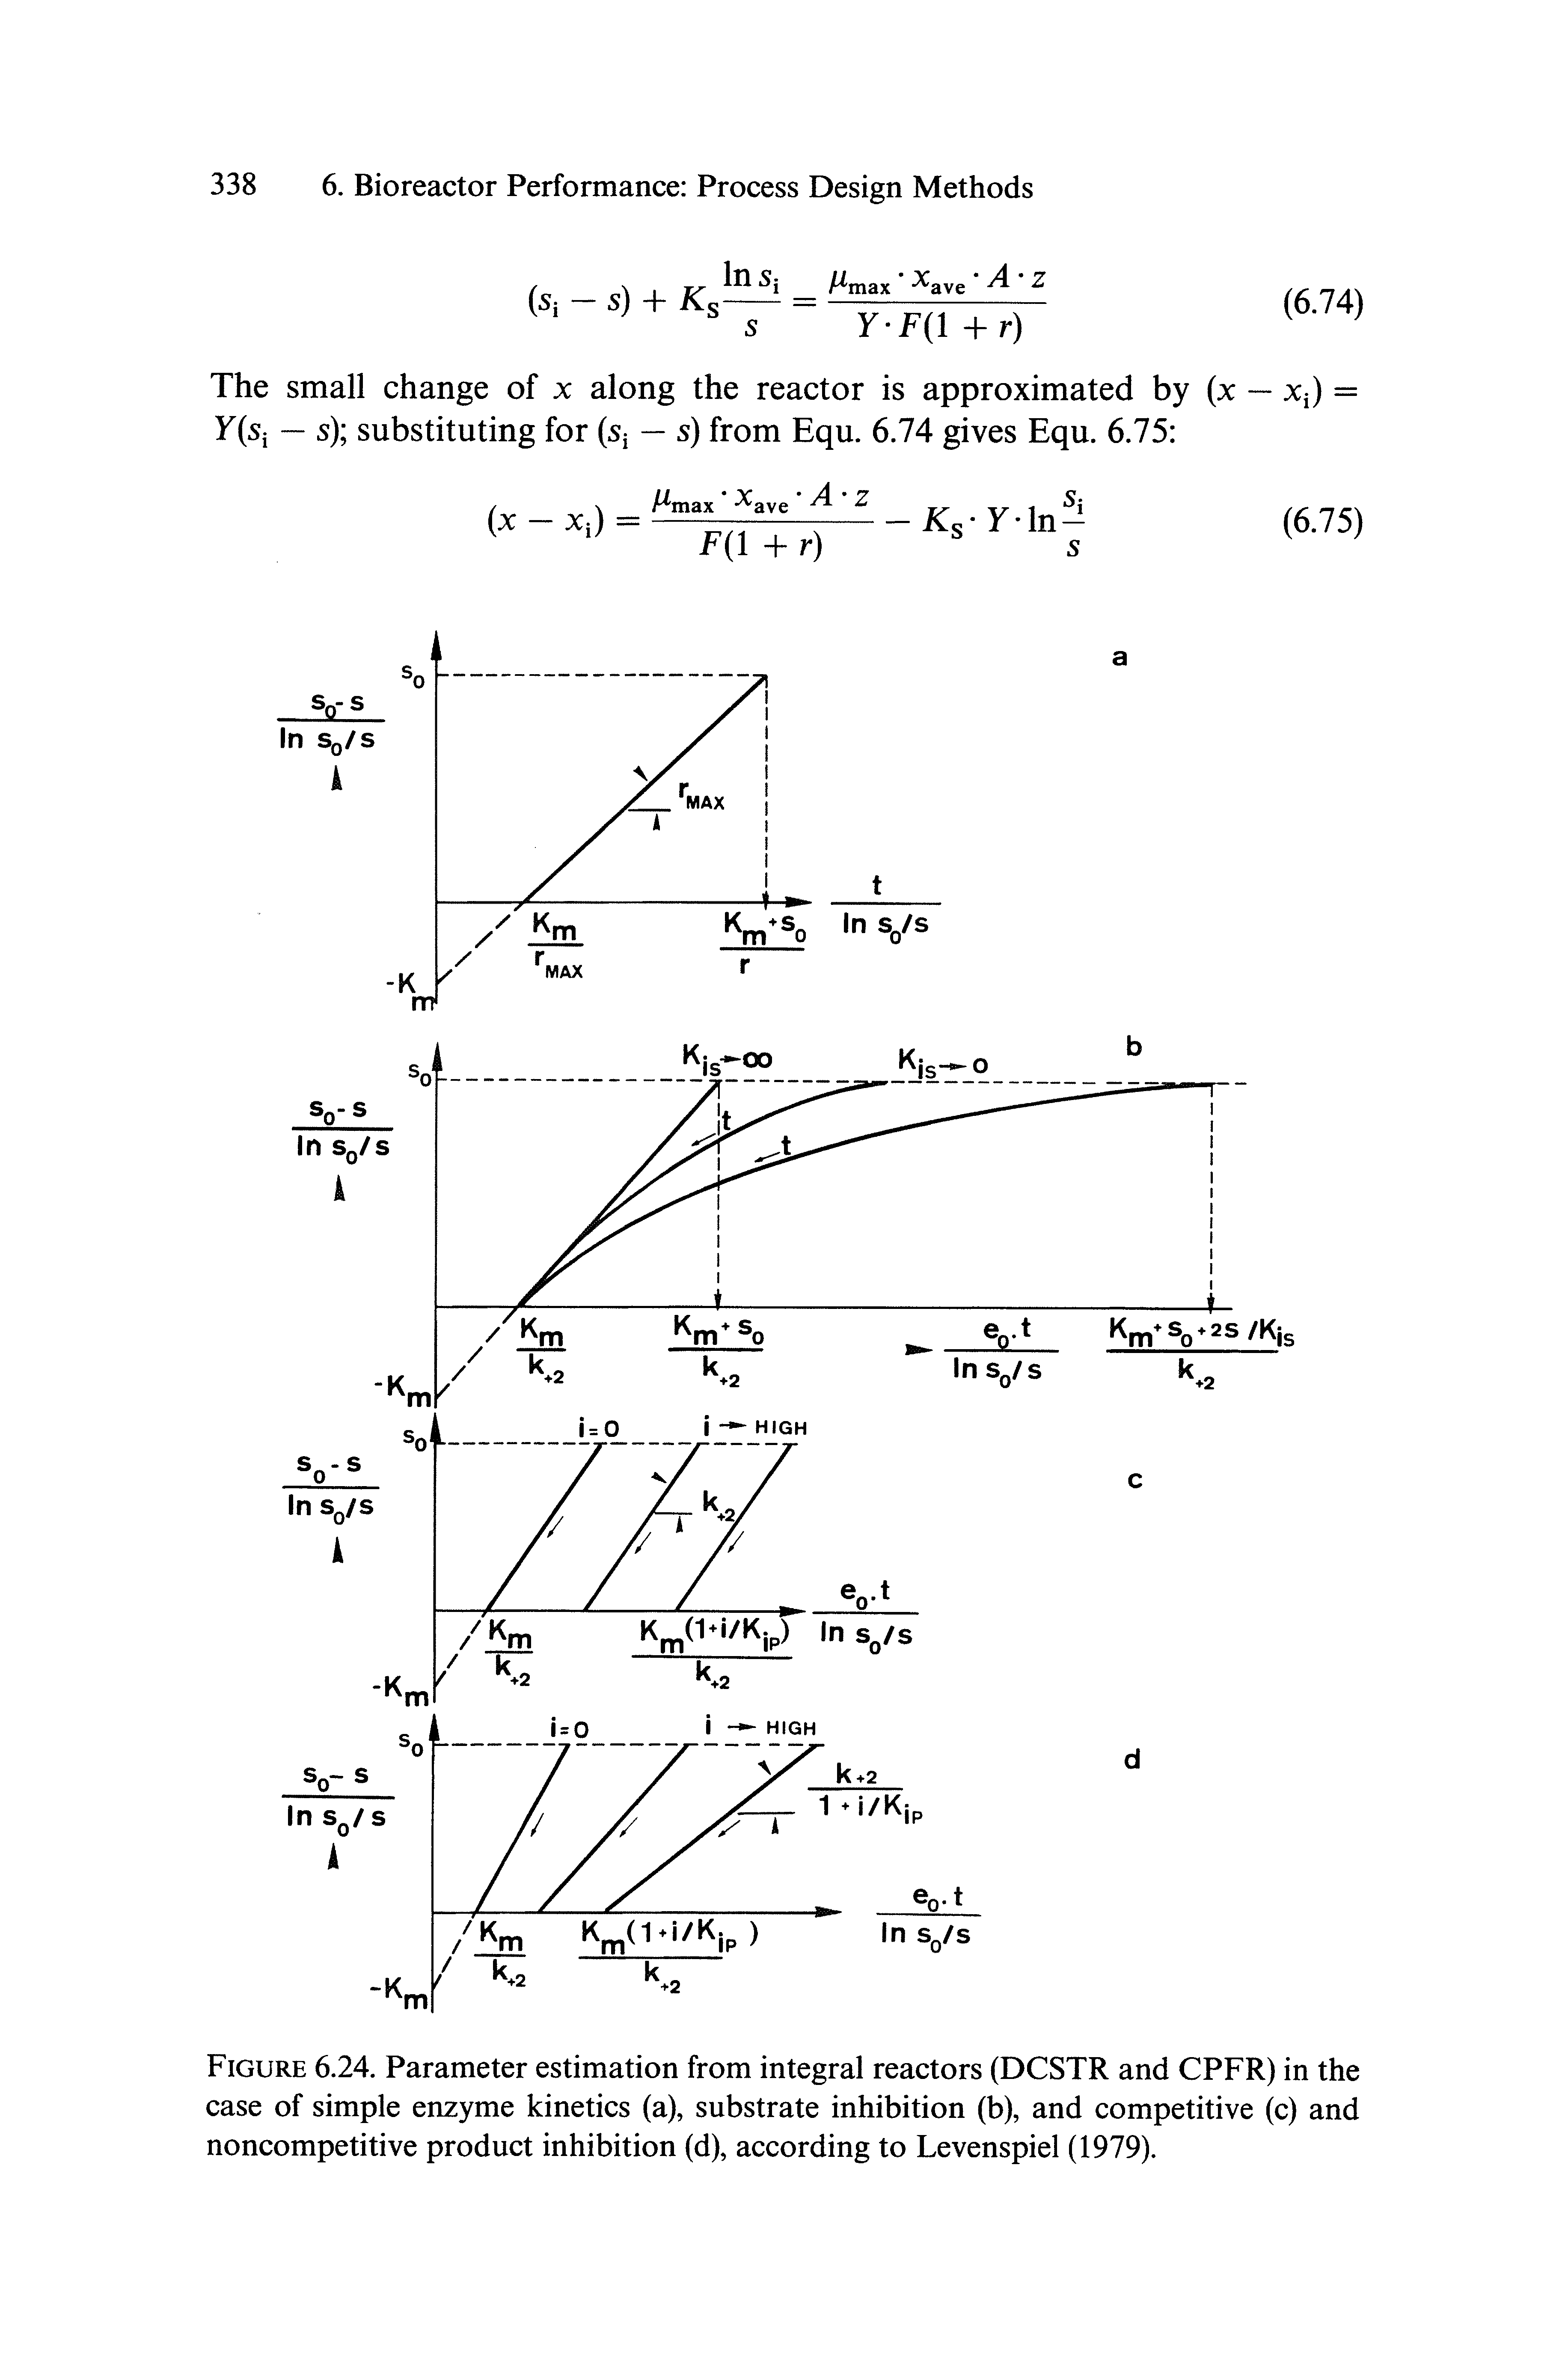 Figure 6.24. Parameter estimation from integral reactors (DCSTR and CPFR) in the case of simple enzyme kinetics (a), substrate inhibition (b), and competitive (c) and noncompetitive product inhibition (d), according to Levenspiel (1979).